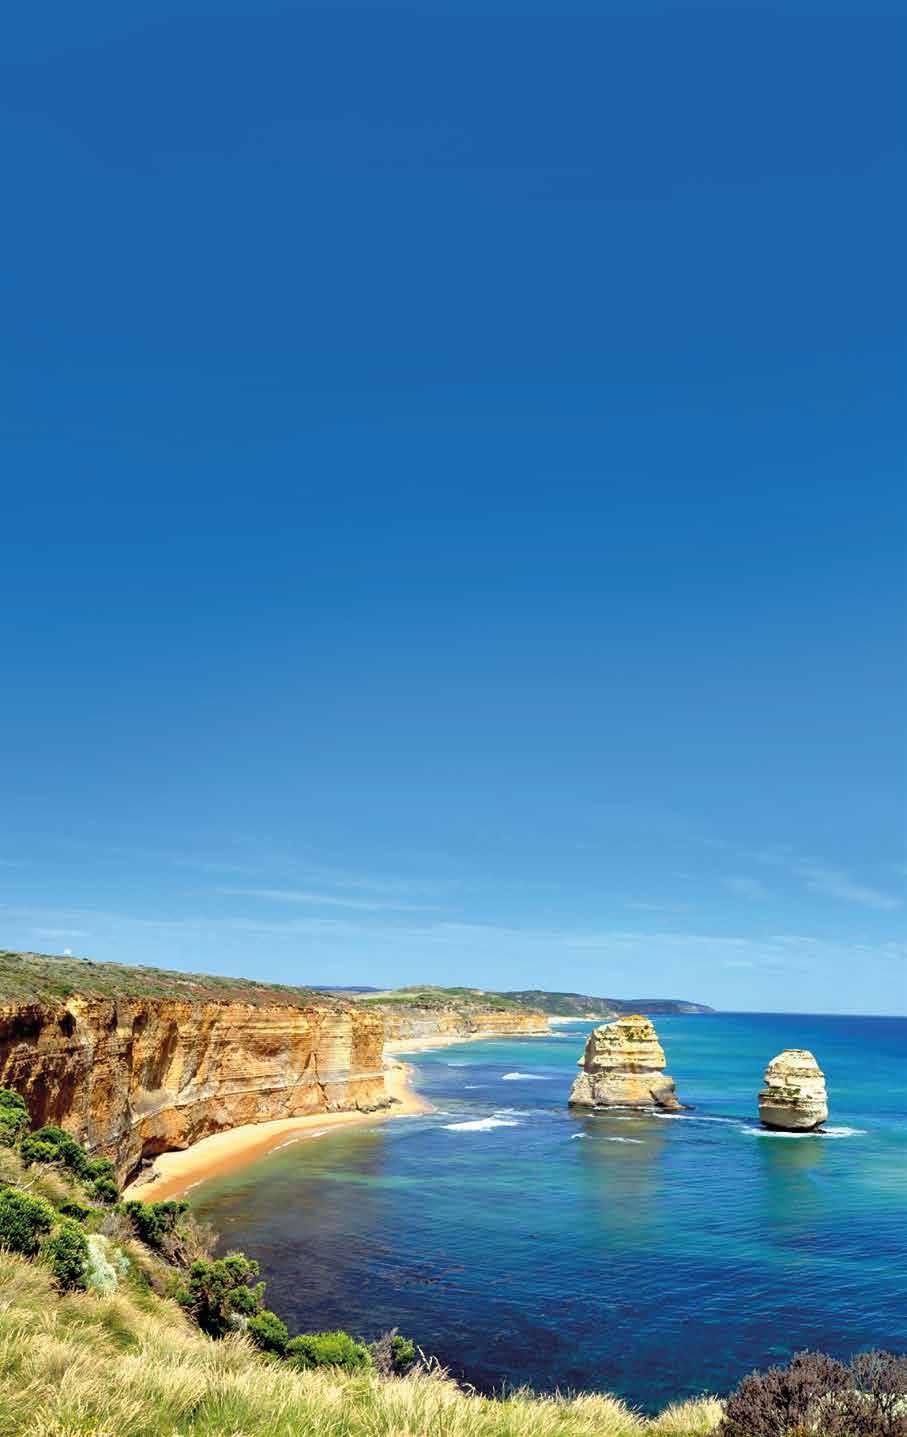 Discover Victoria through Self-Drive Journeys Accommodation (Room Only) Car Rental & GPS Touring as per itinerary From coastal journeys and outback adventures, an Aussie road trip is one of the best